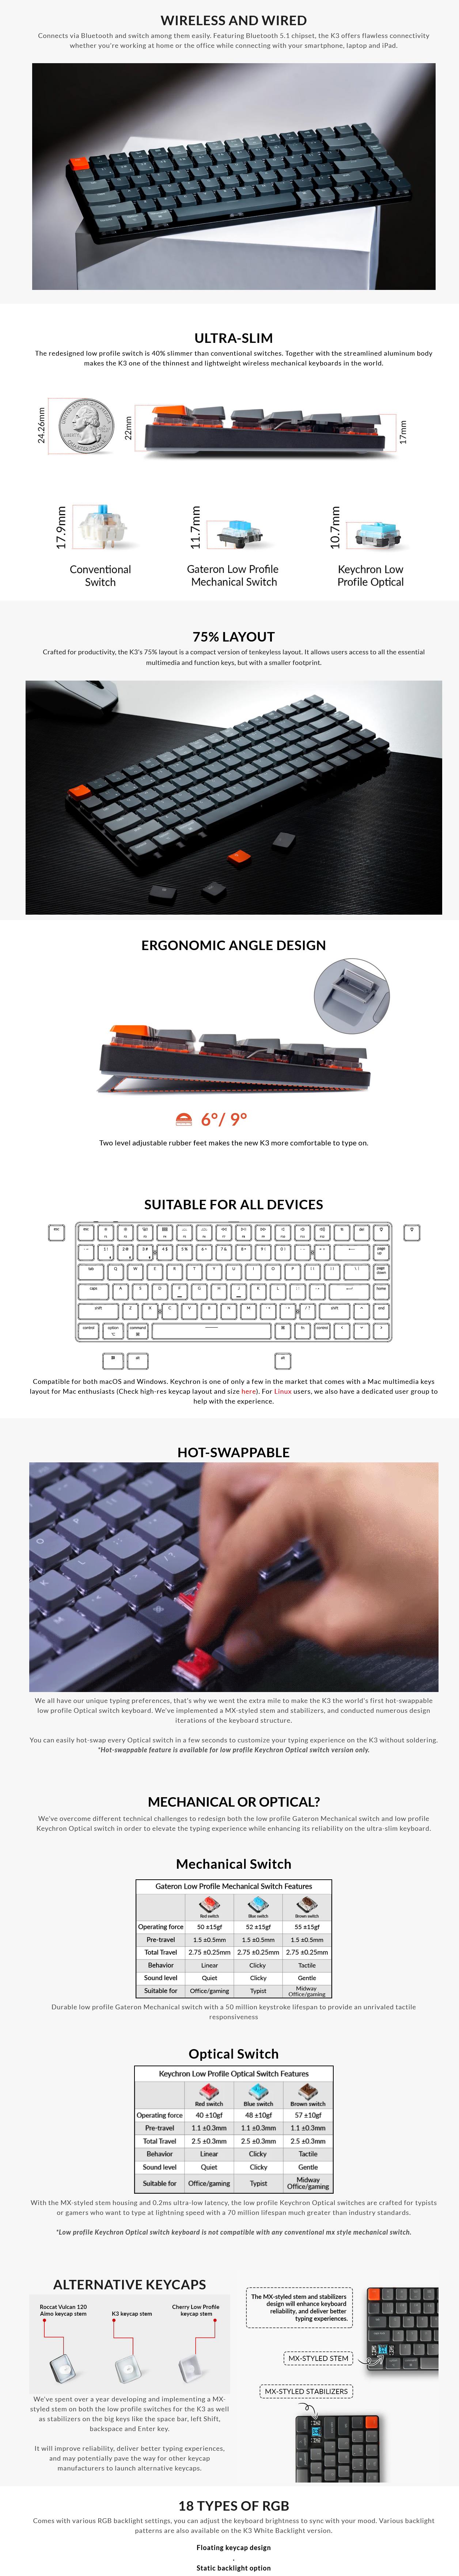 A large marketing image providing additional information about the product Keychron K3v2 Slim RGB Wireless Hot-Swappable Mechanical Keyboard (Optical Brown Switch) - Additional alt info not provided